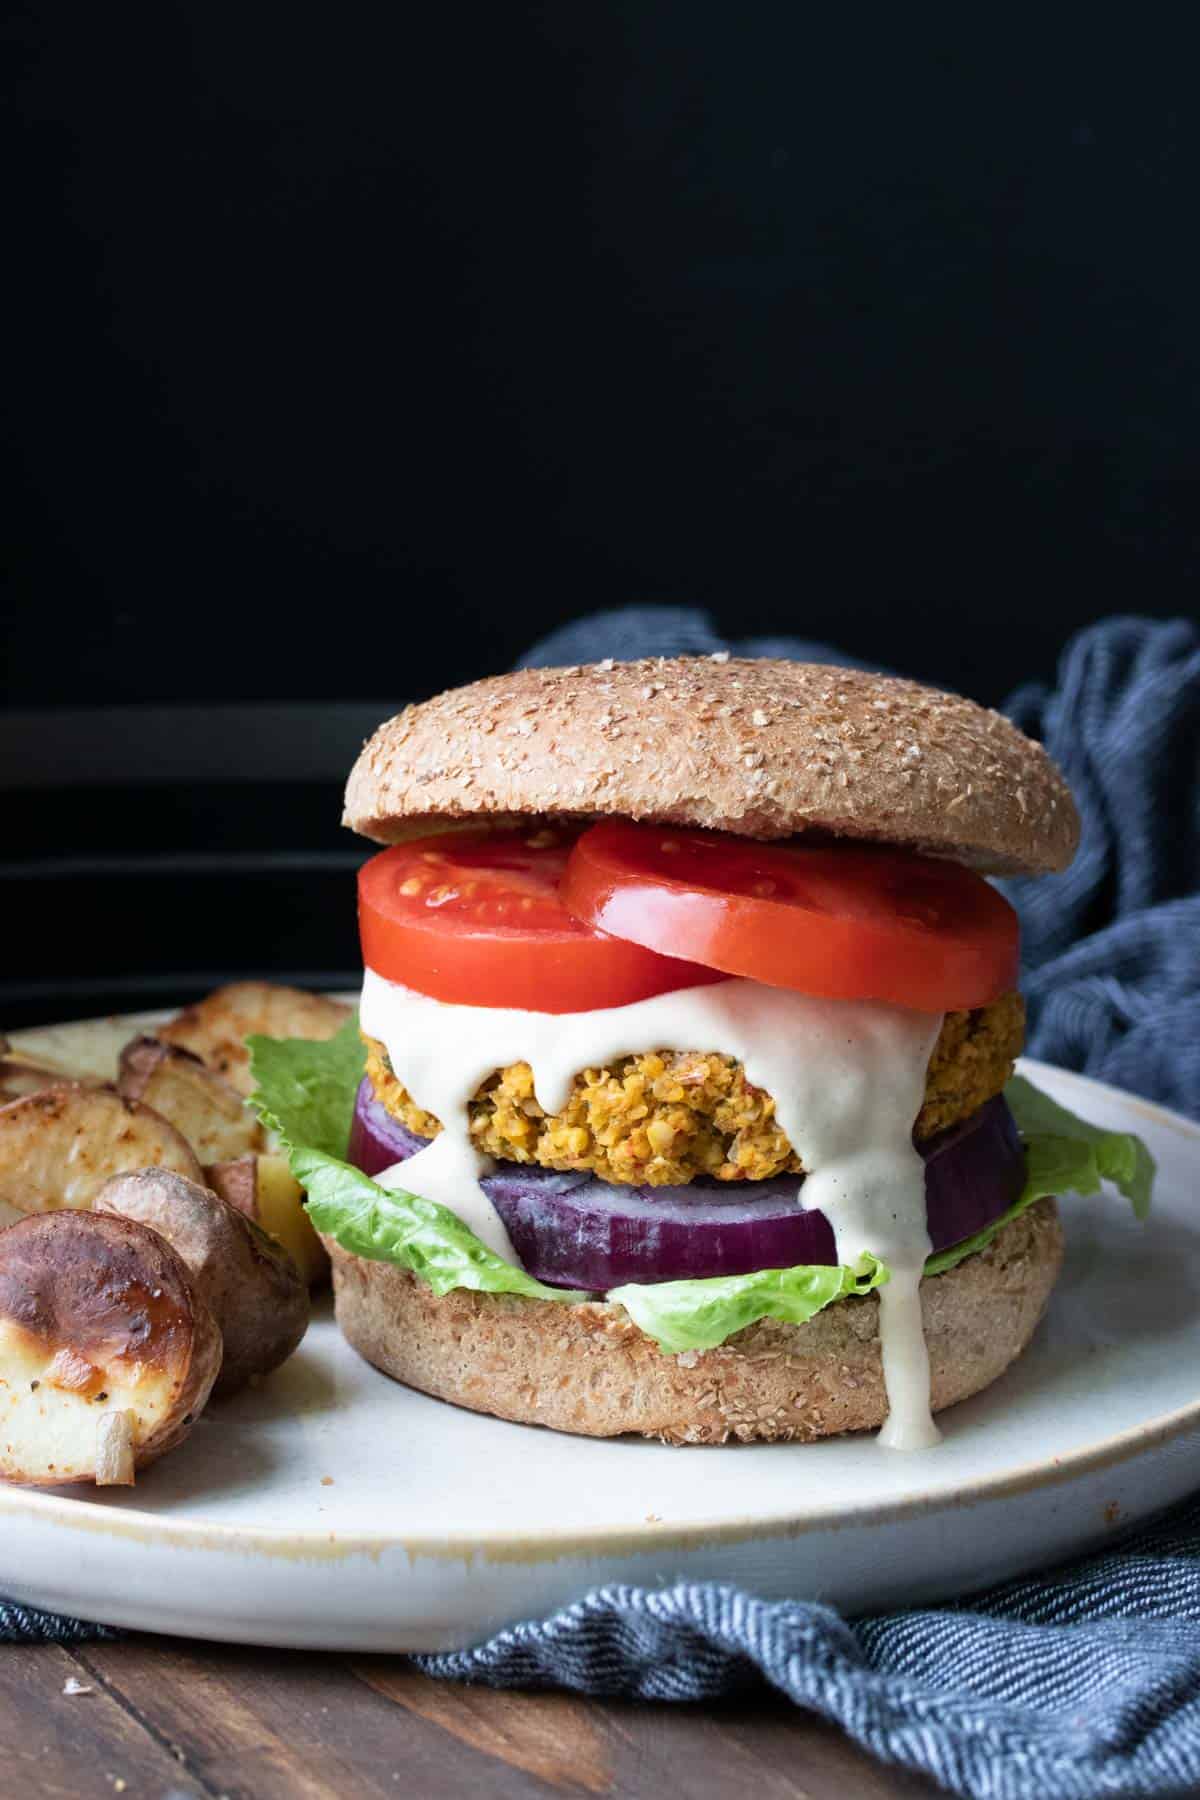 A falafel burger topped with lettuce, tomato, red onion and sauce on a white plate